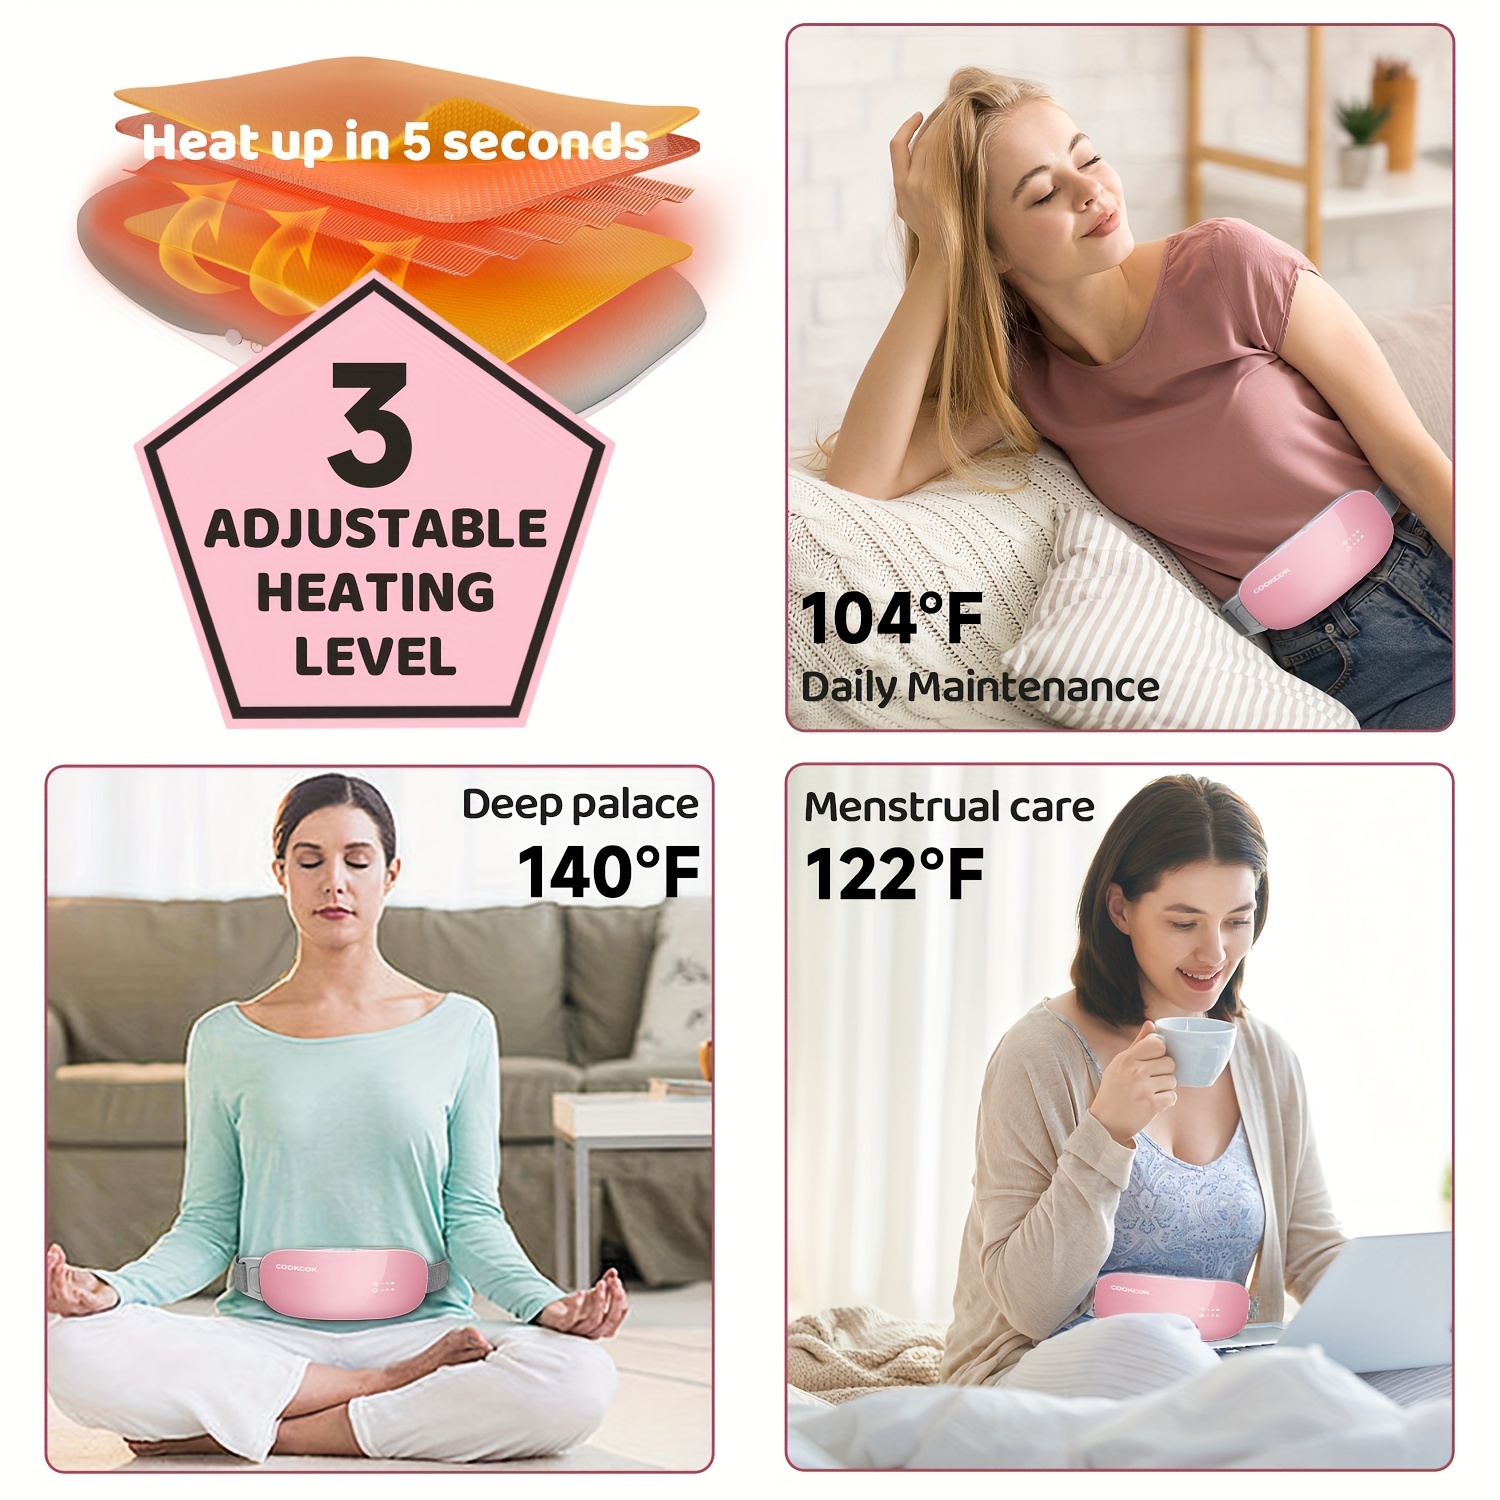 Heating Pads for Cramps-Electric Cordless Menstrual Heating Pad